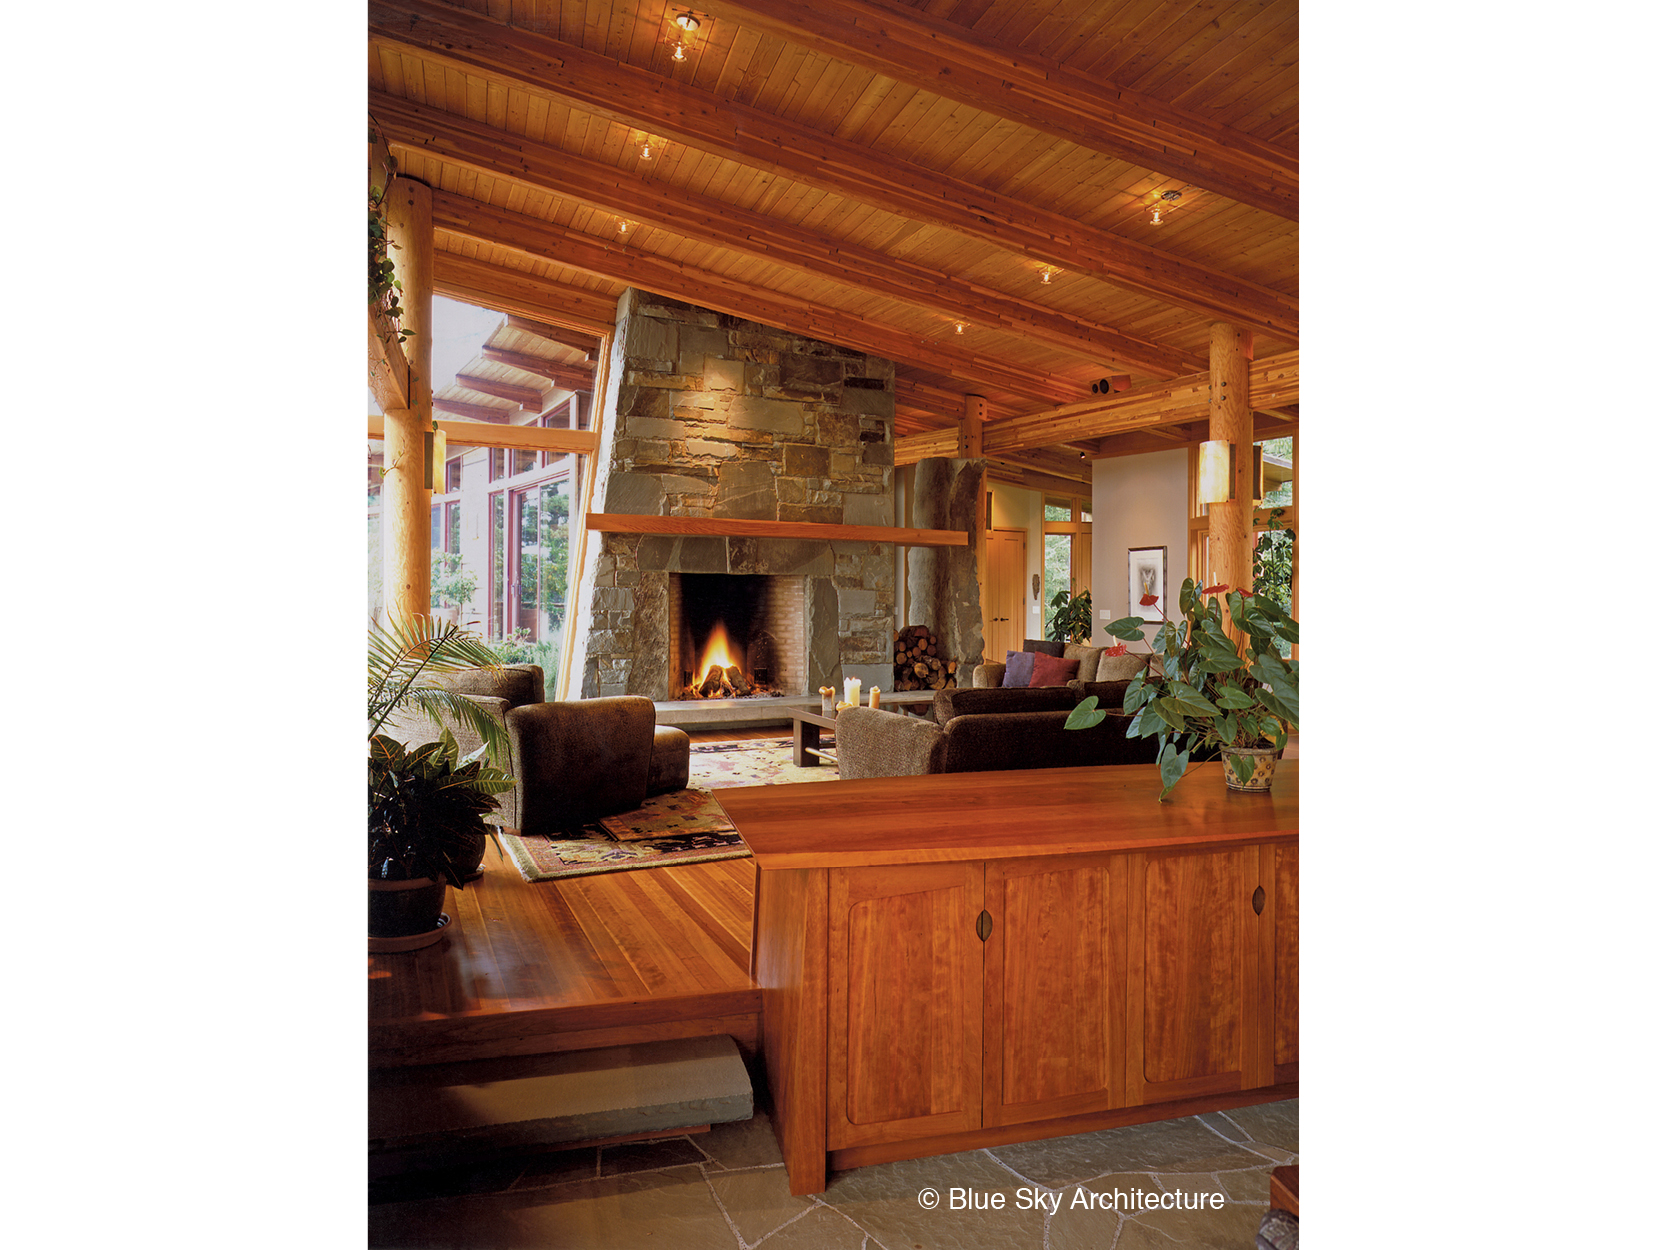 Sandstone slab fireplace with wood rafter ceiling in Hill House